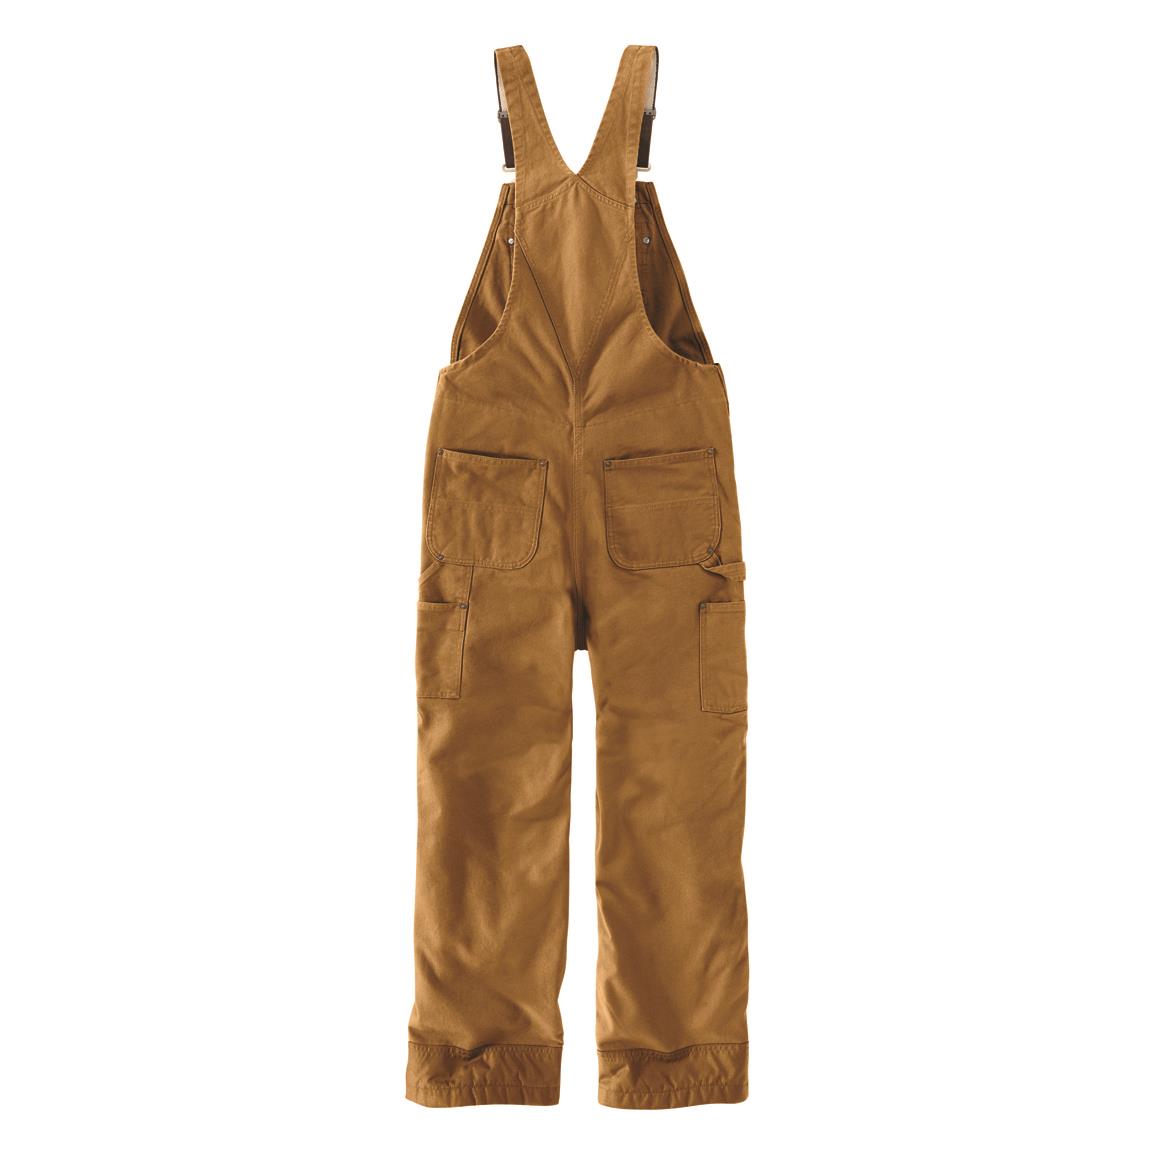 Browning Upland Hunting Chaps - 716797, Camo Overalls & Coveralls at